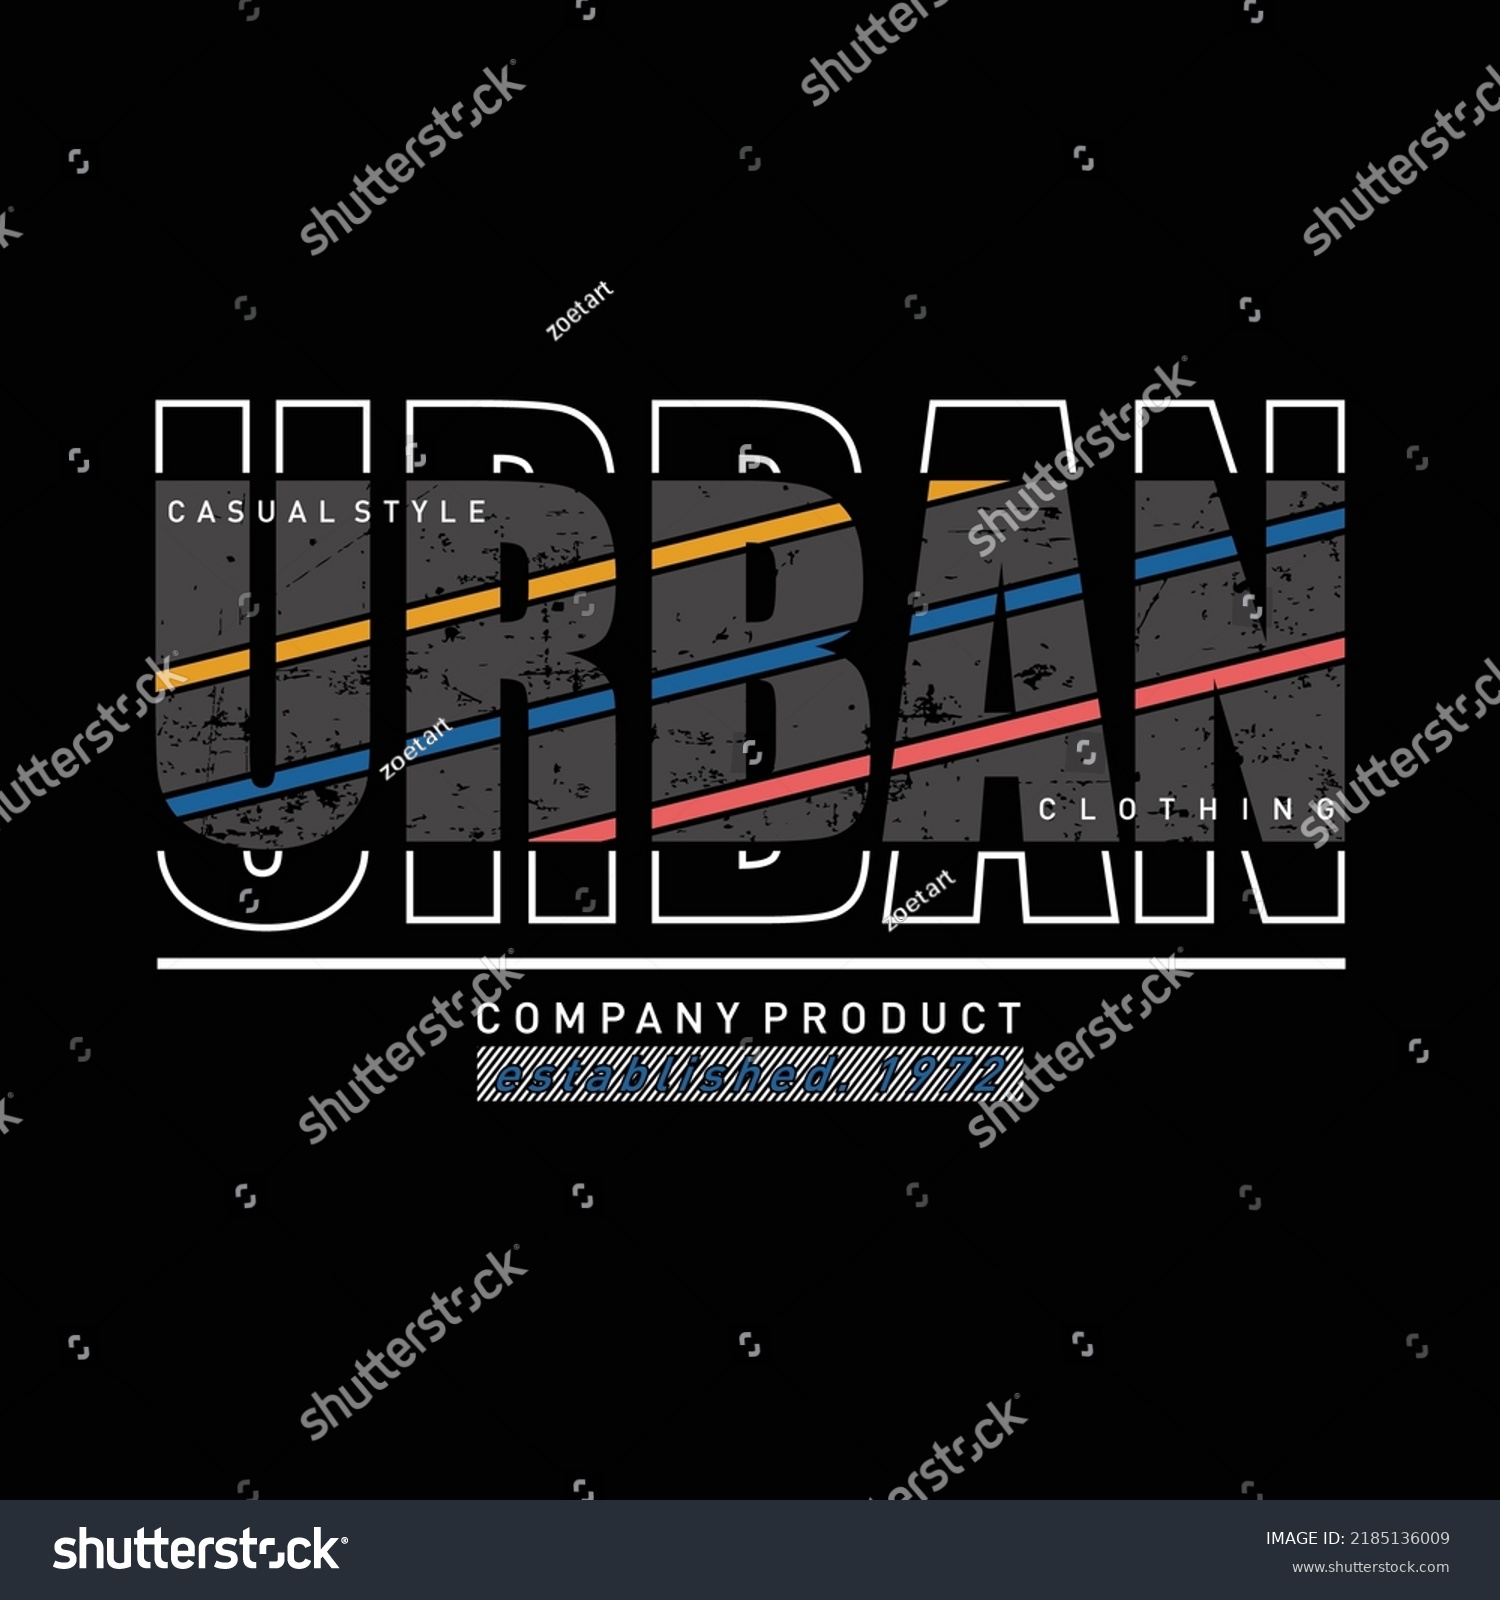 Urban Text Cool Graphic Vector Illustration Stock Vector (Royalty Free ...